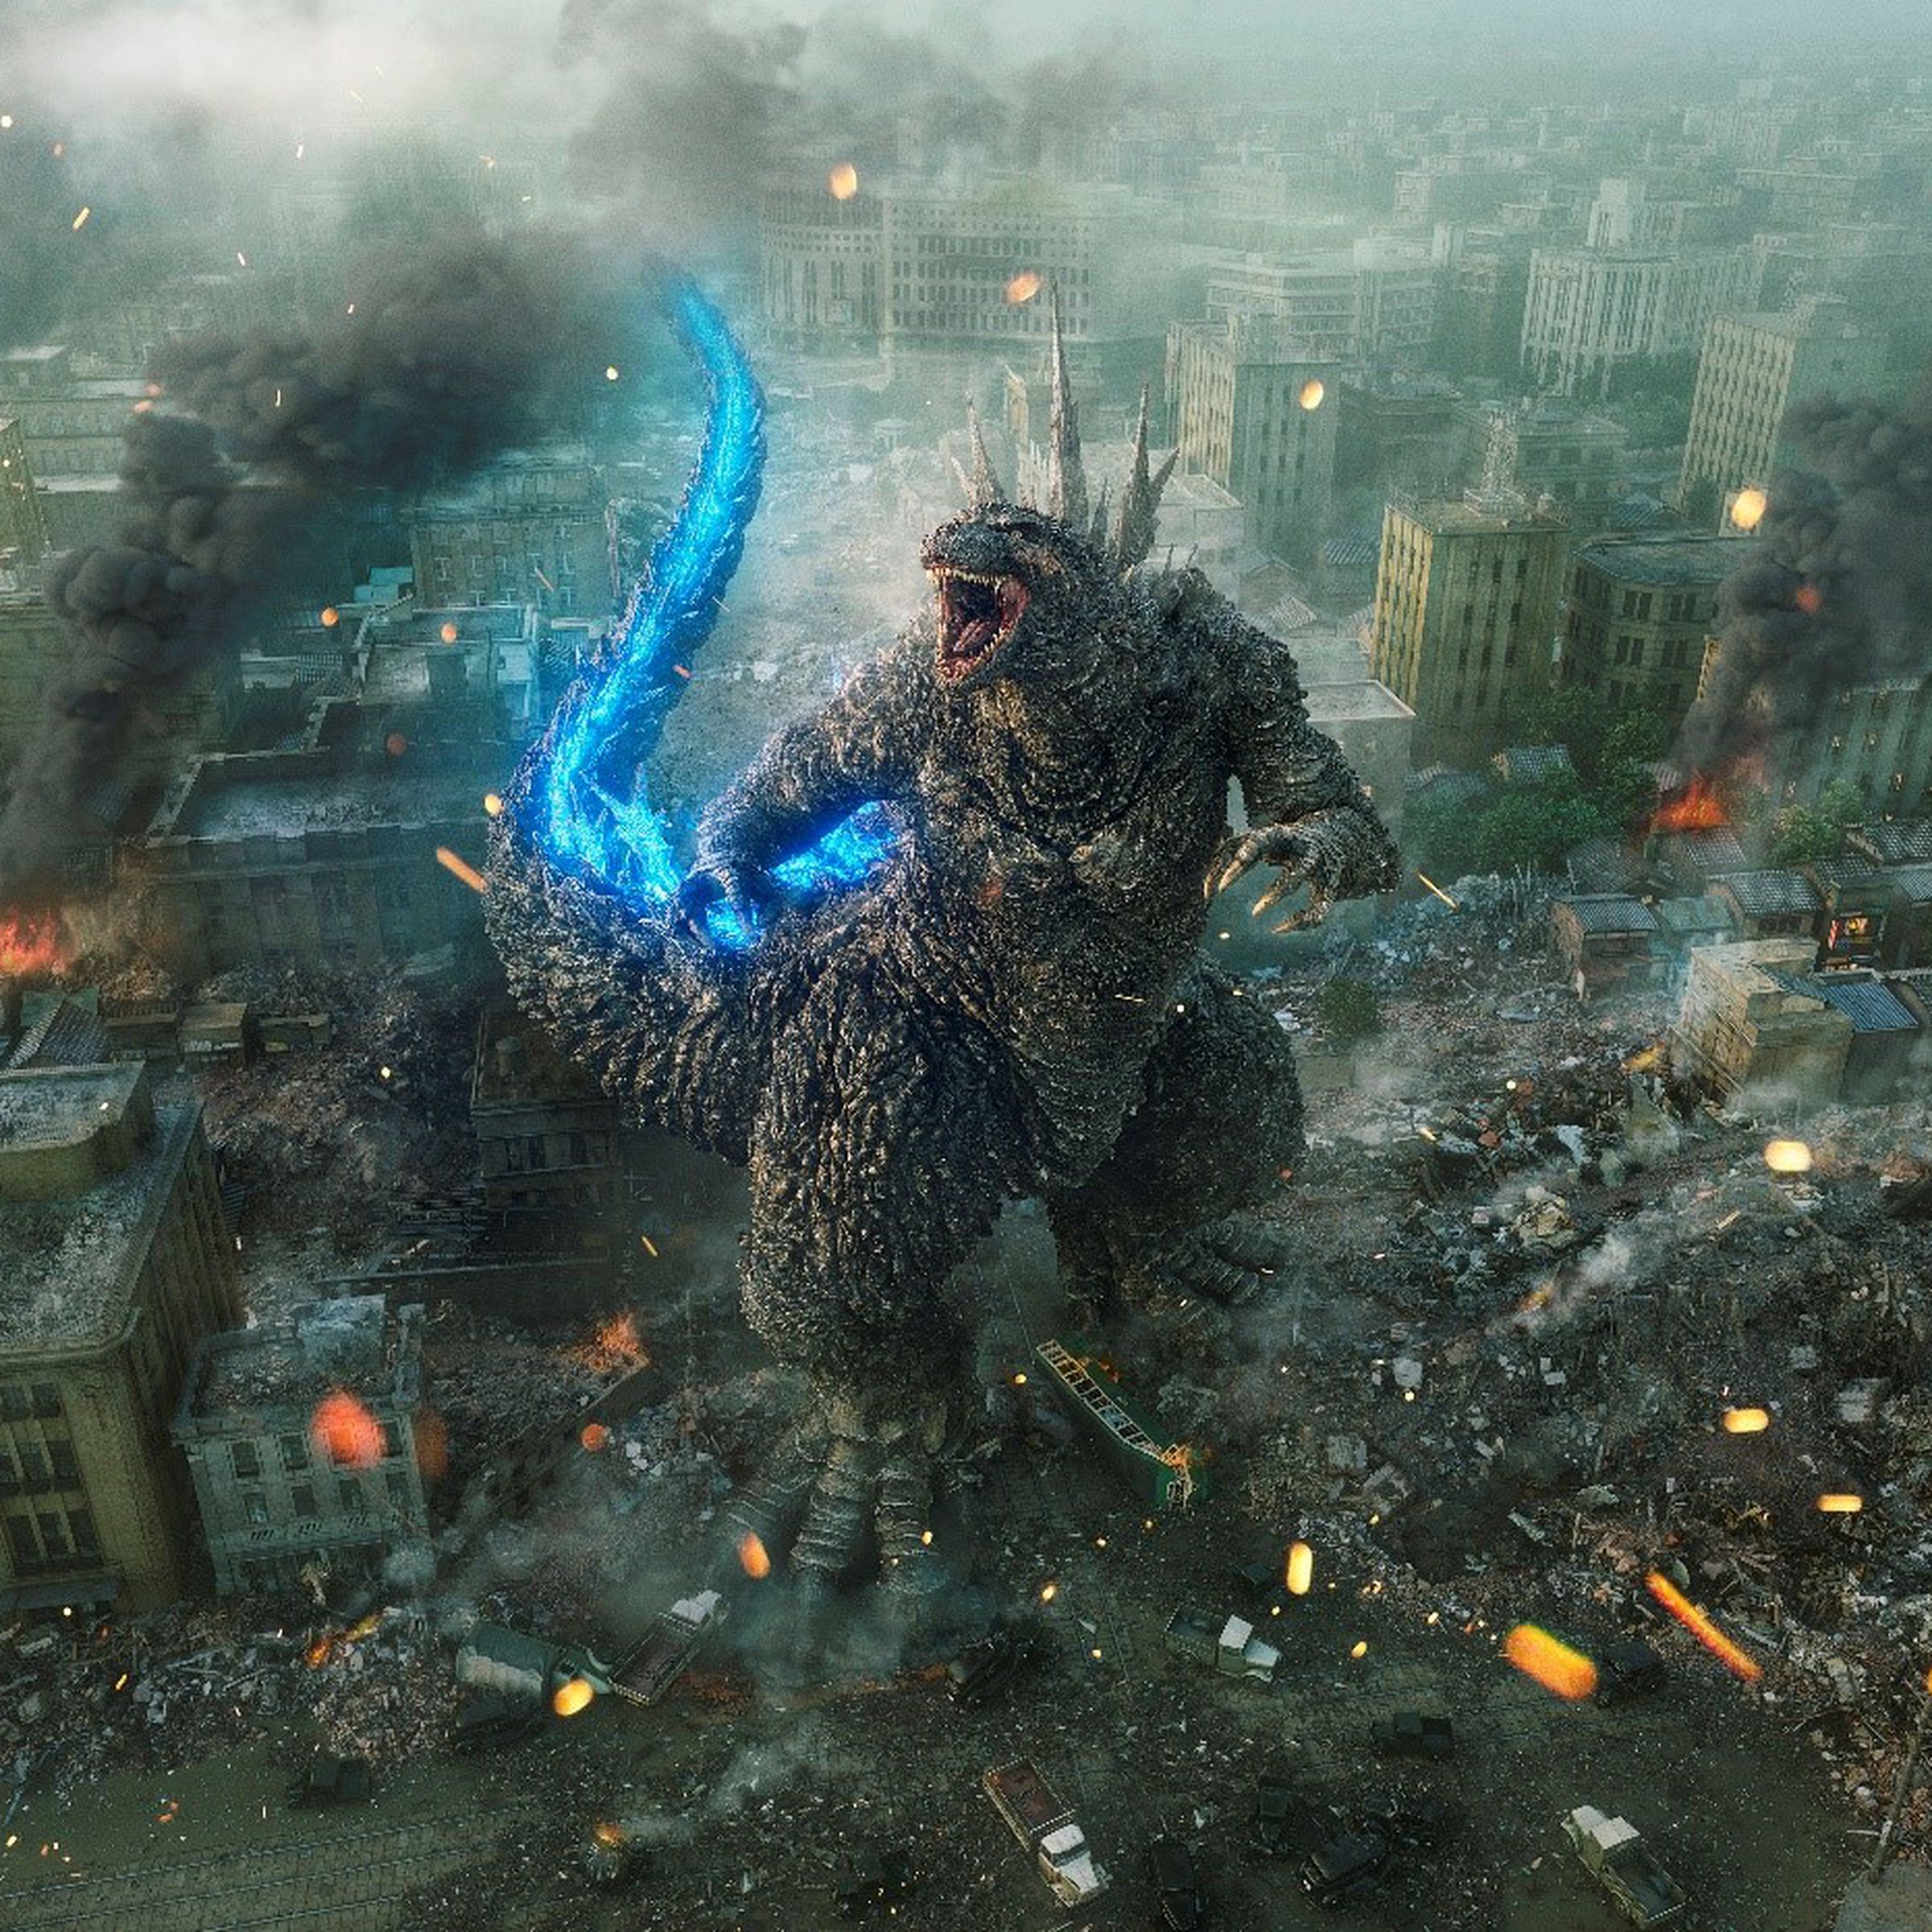 A wide, aerial shot of a gargantuan, upright, dinosaur-like creature roaring up into the sky as a ruined city smolders around it.